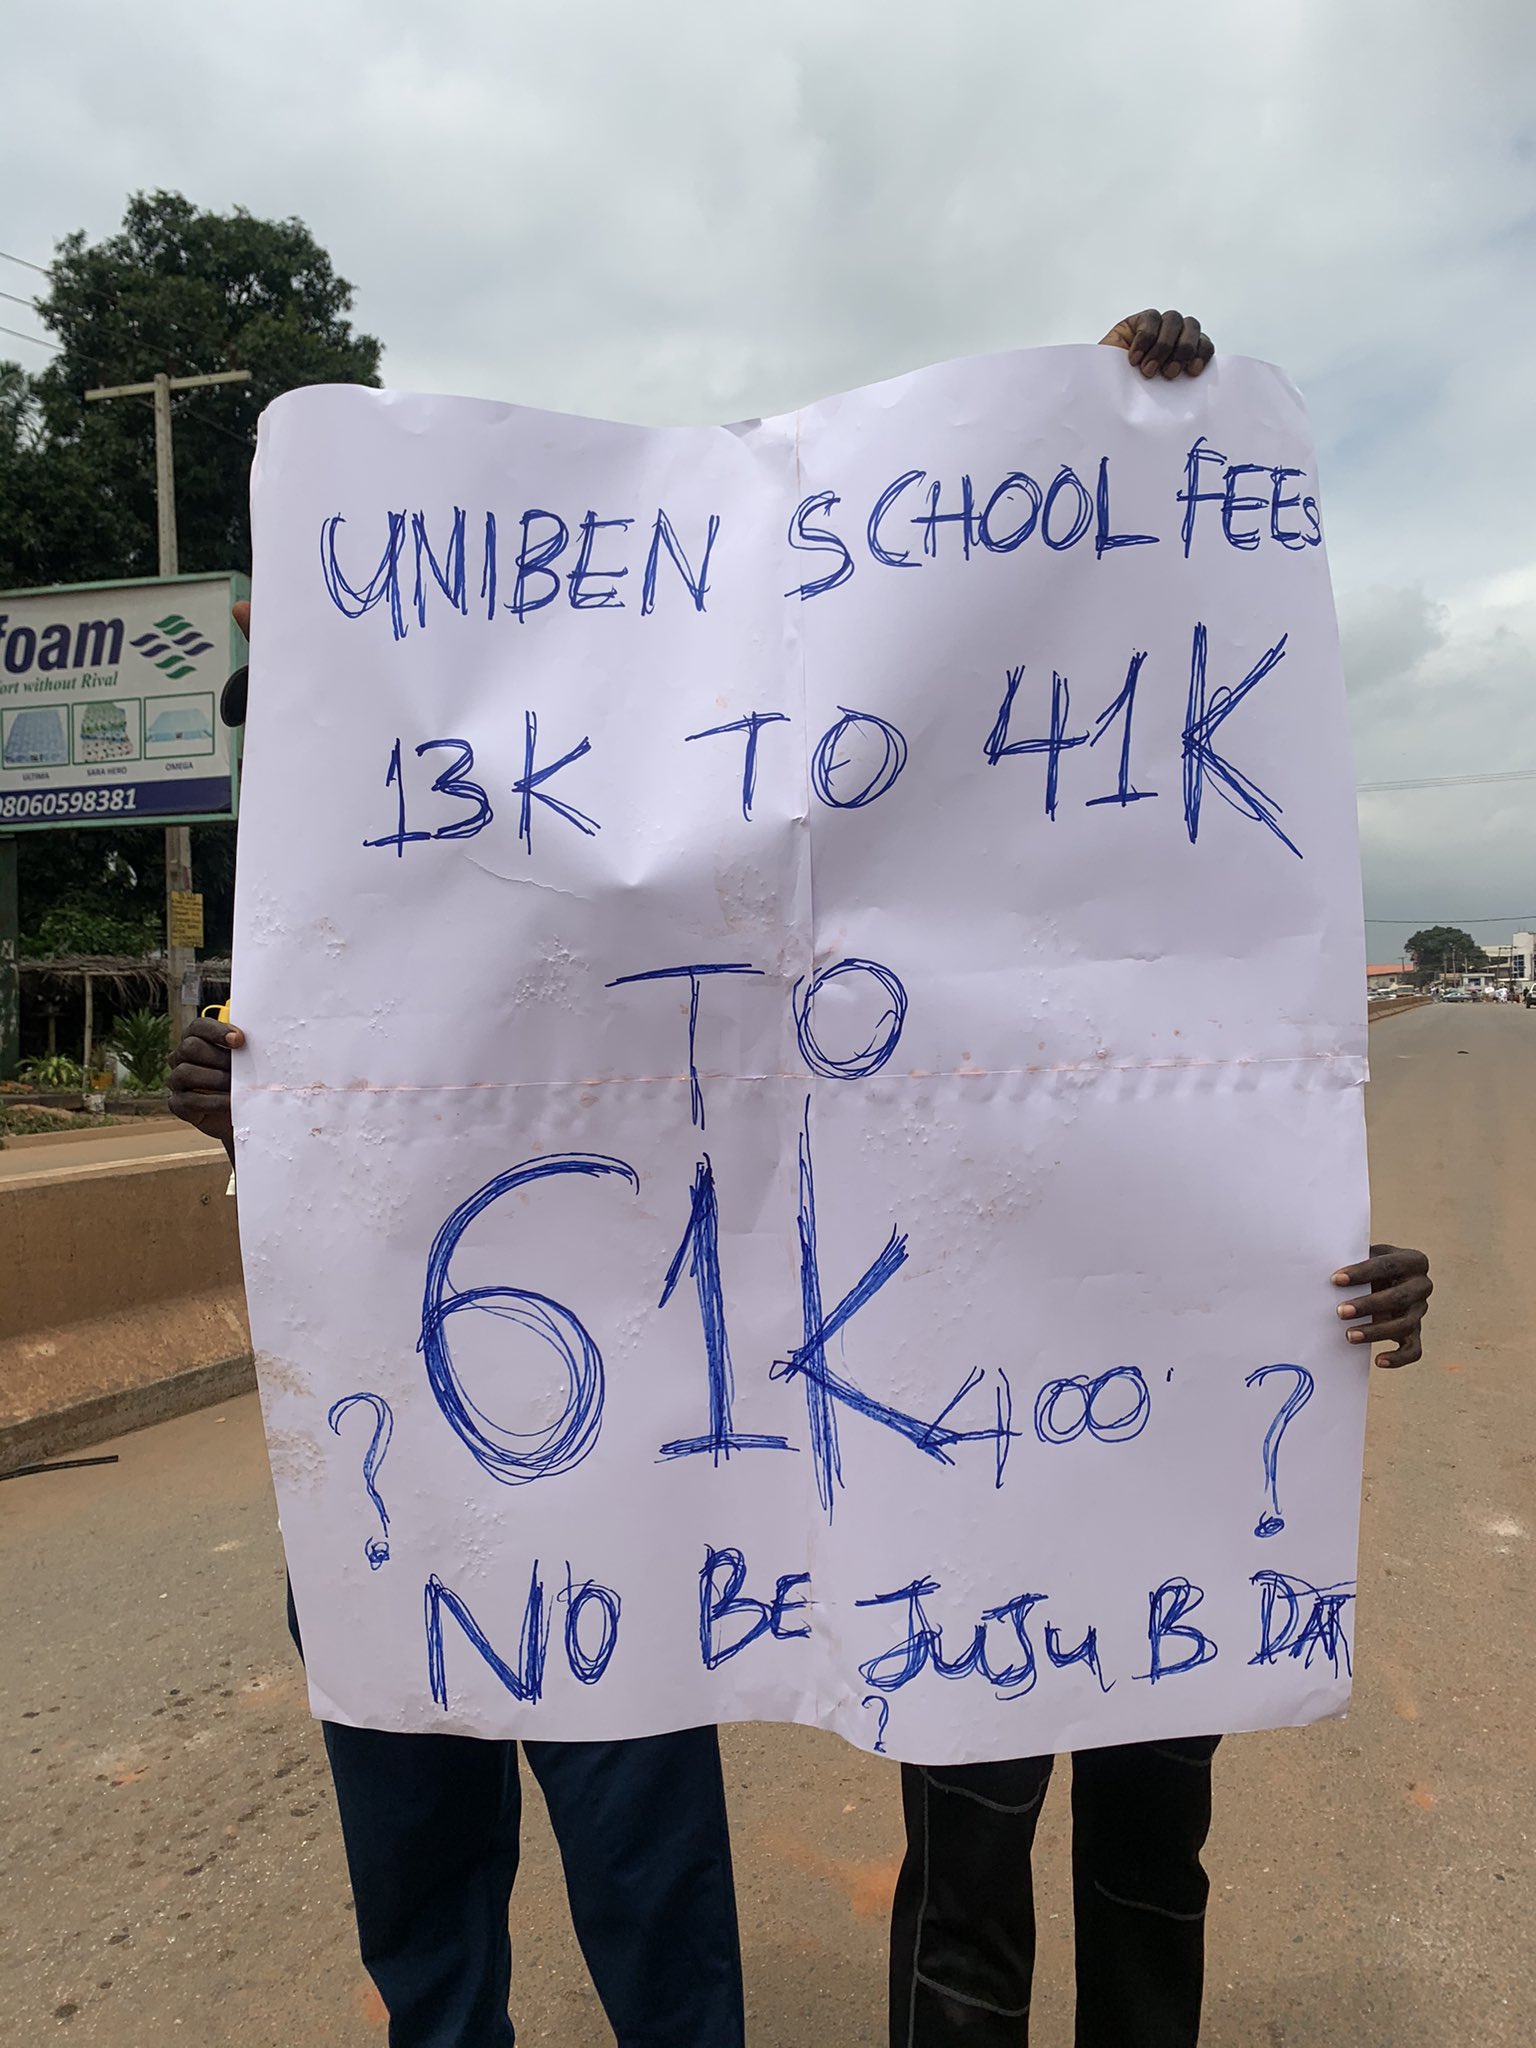 UNIBEN Students Protest Against Astronomical Fees Amidst High Cost Of Living